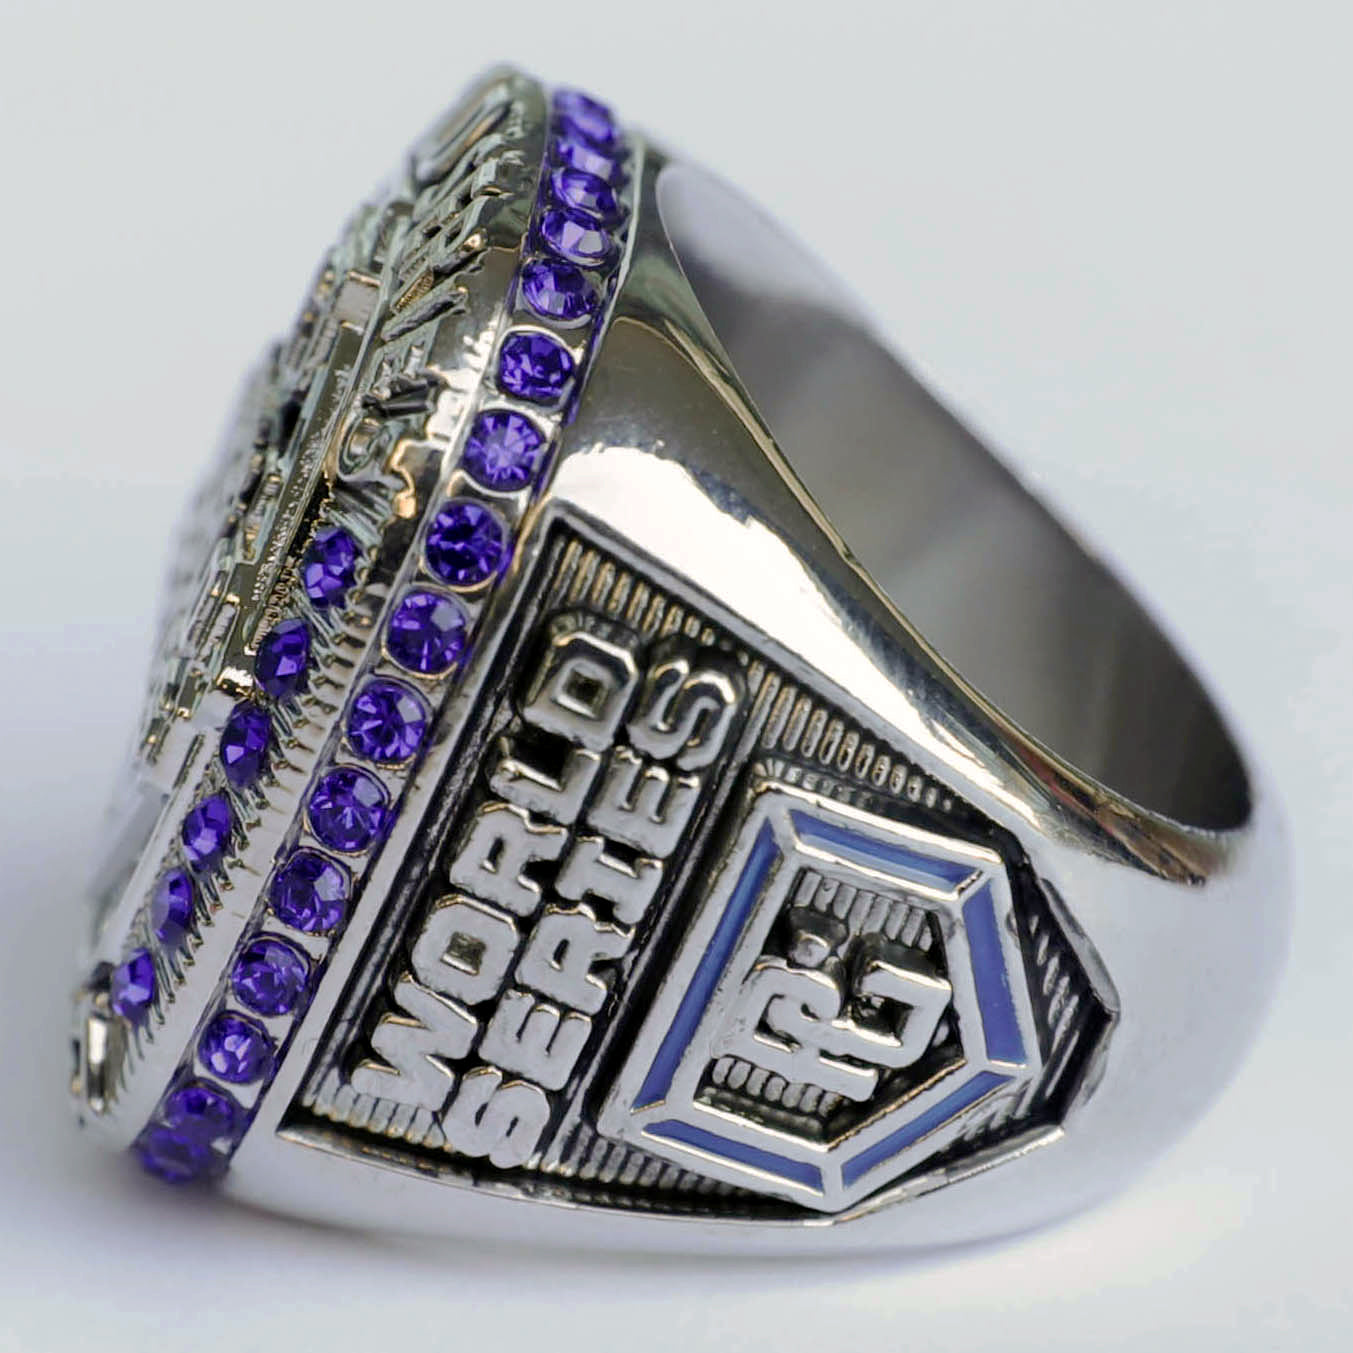 Perfect Game Regional World Series Ring Finalist – Global Awards